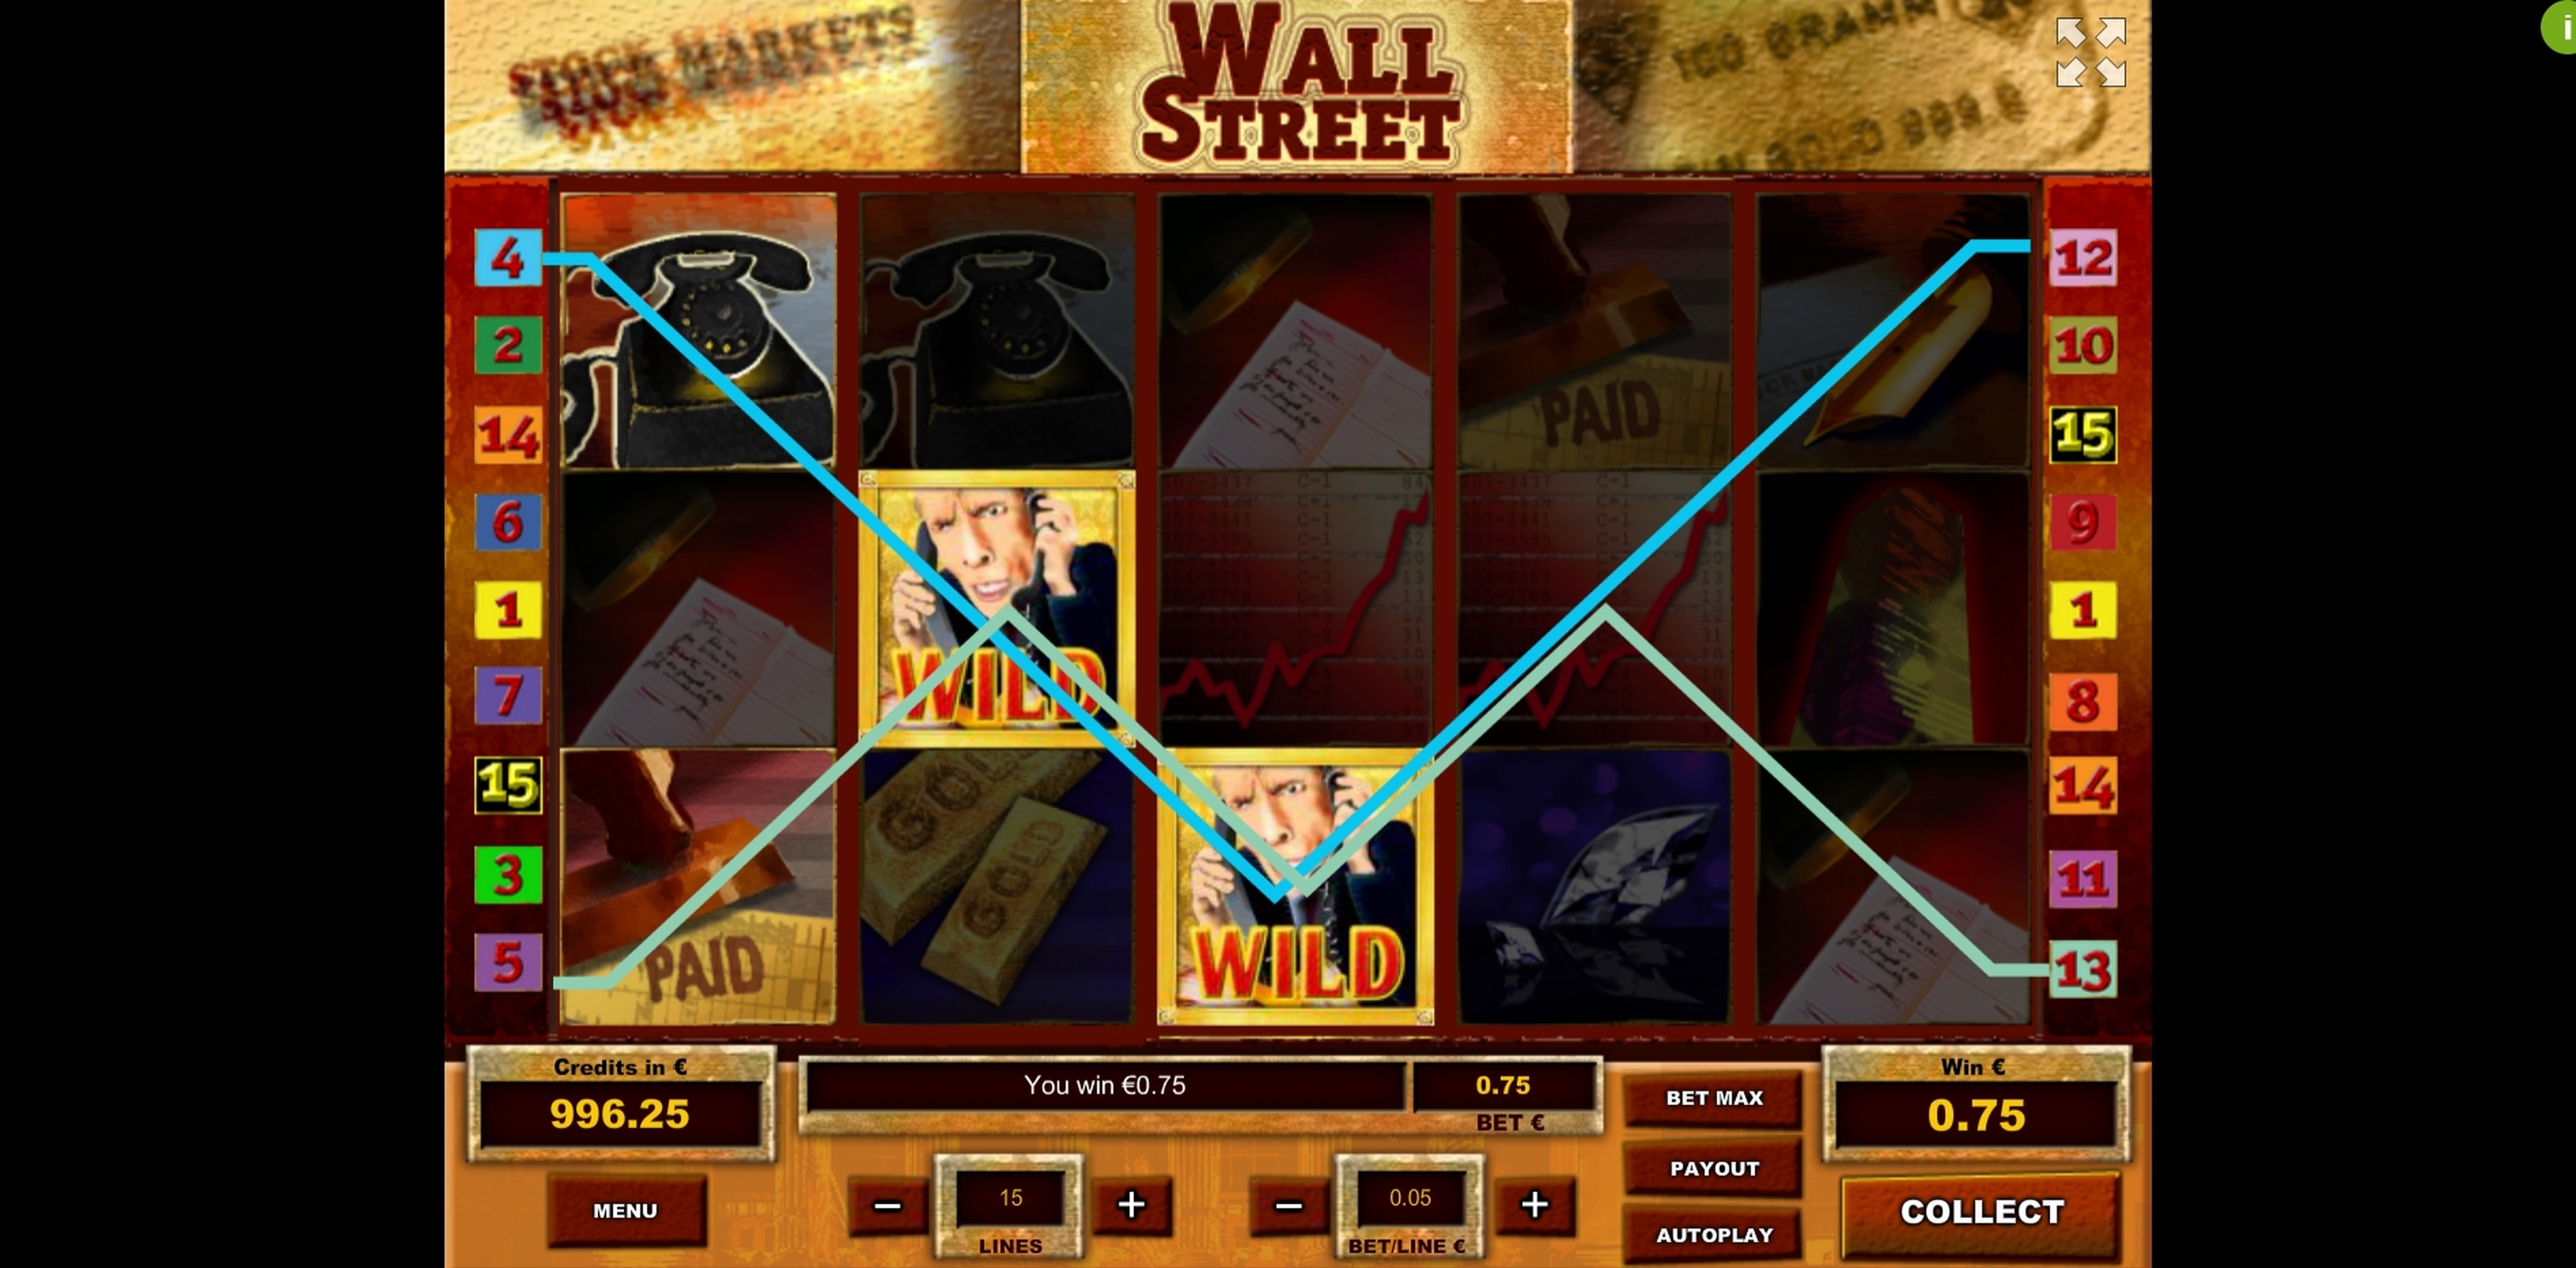 Win Money in Wall Street Free Slot Game by Tom Horn Gaming